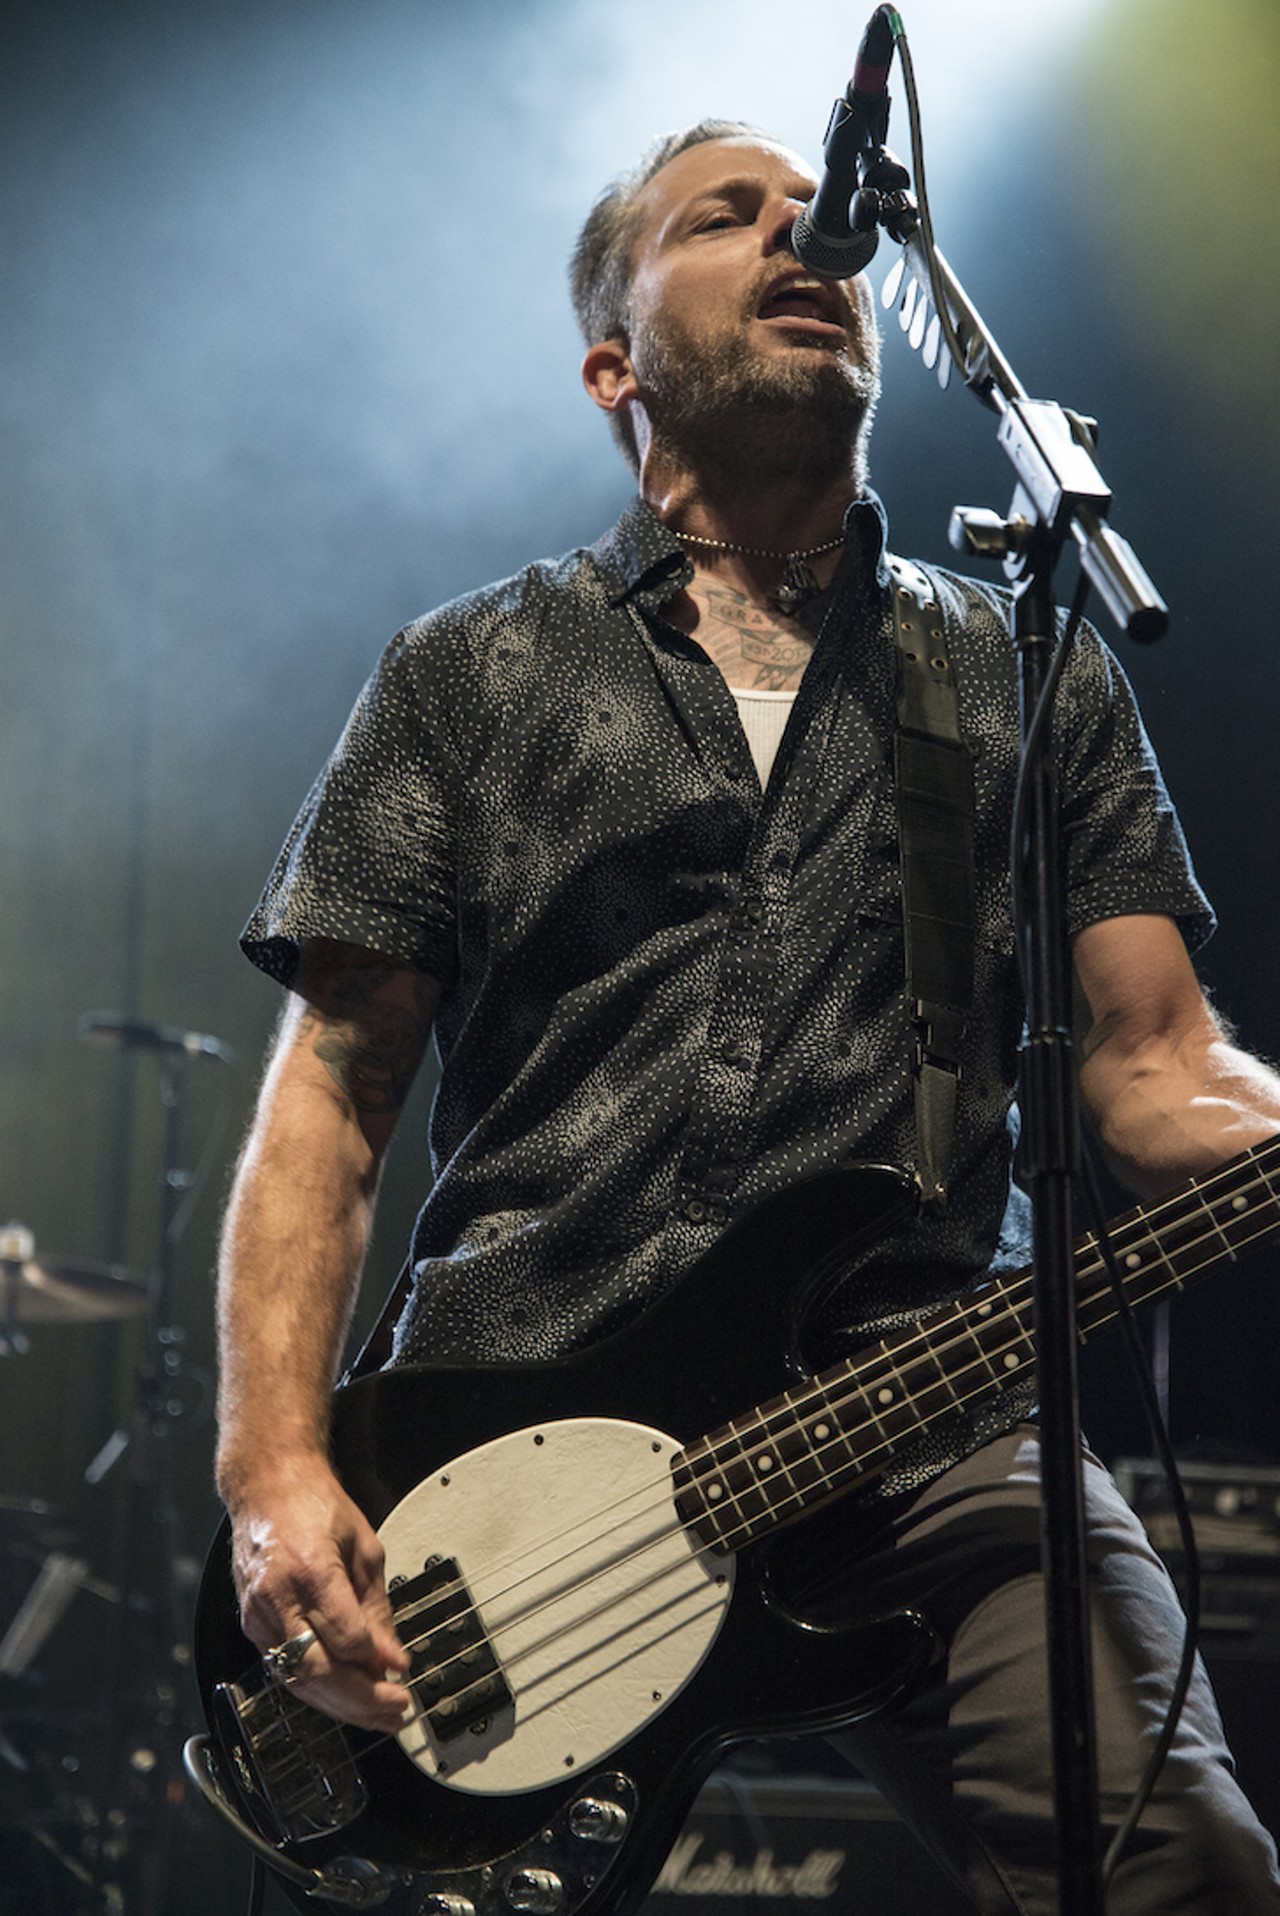 Photos from the Summerland tour with Lit, Everclear, Sugar Ray and Sponge at the Hard Rock Live